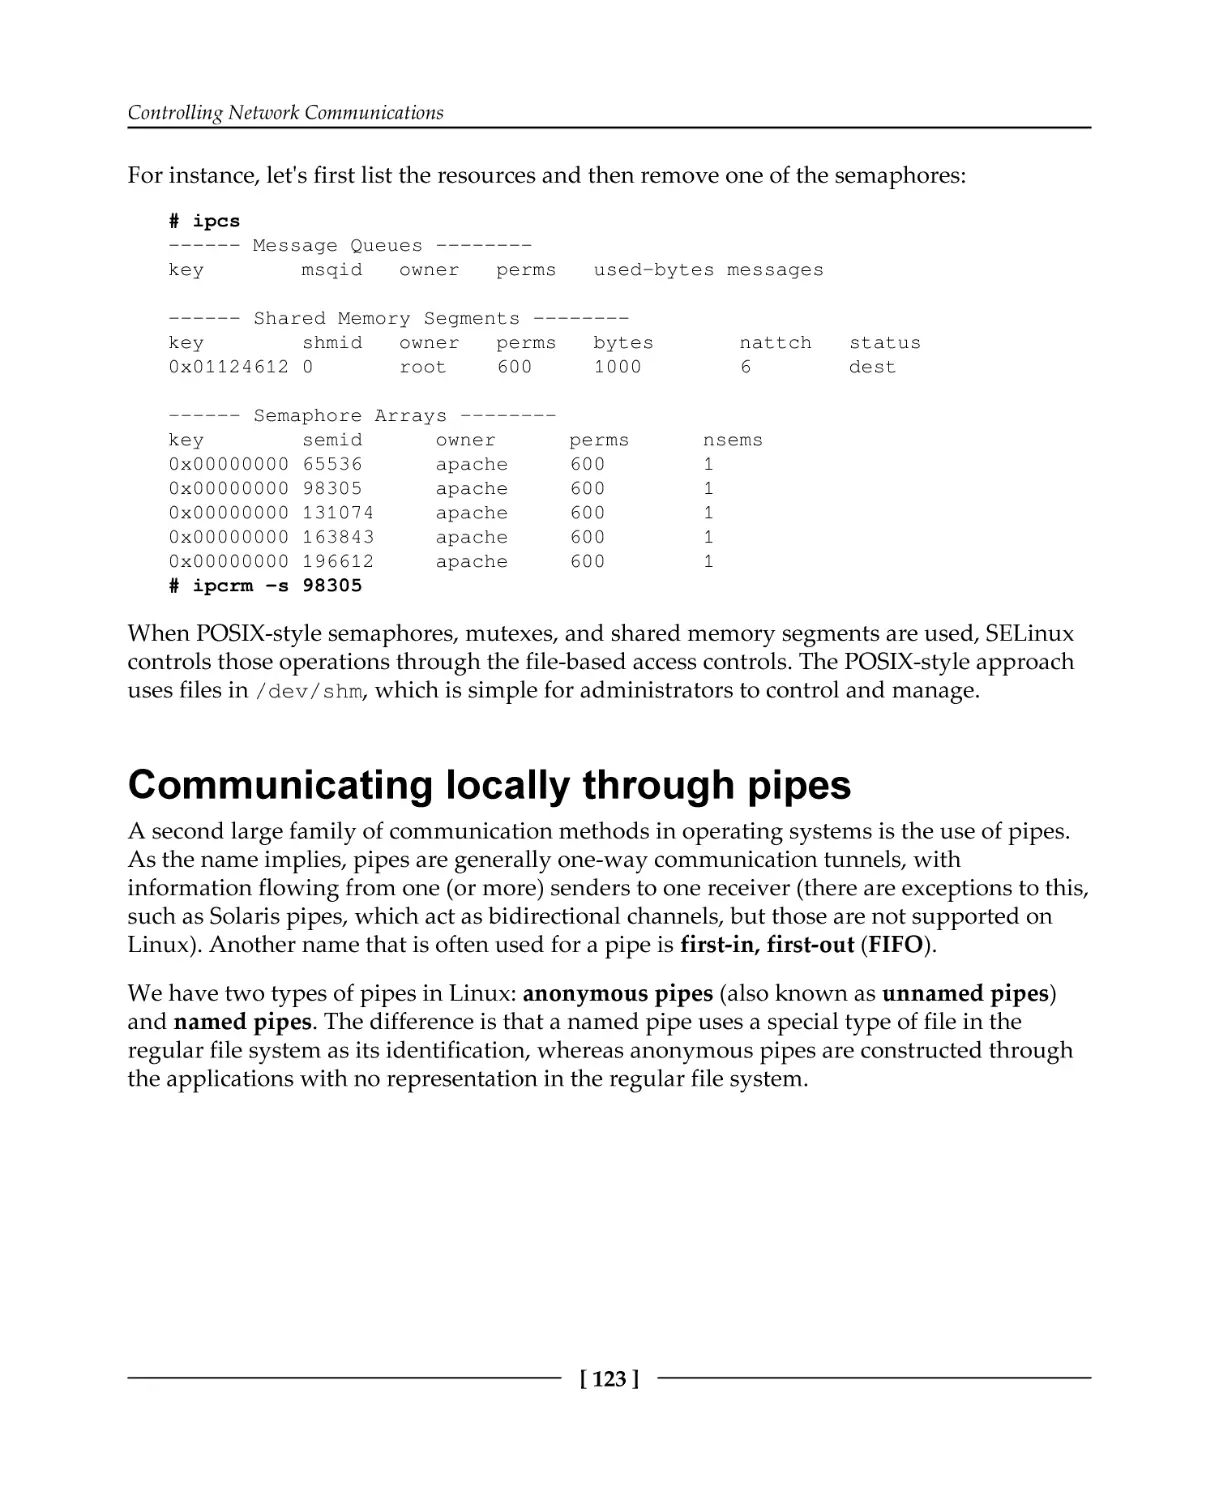 Communicating locally through pipes